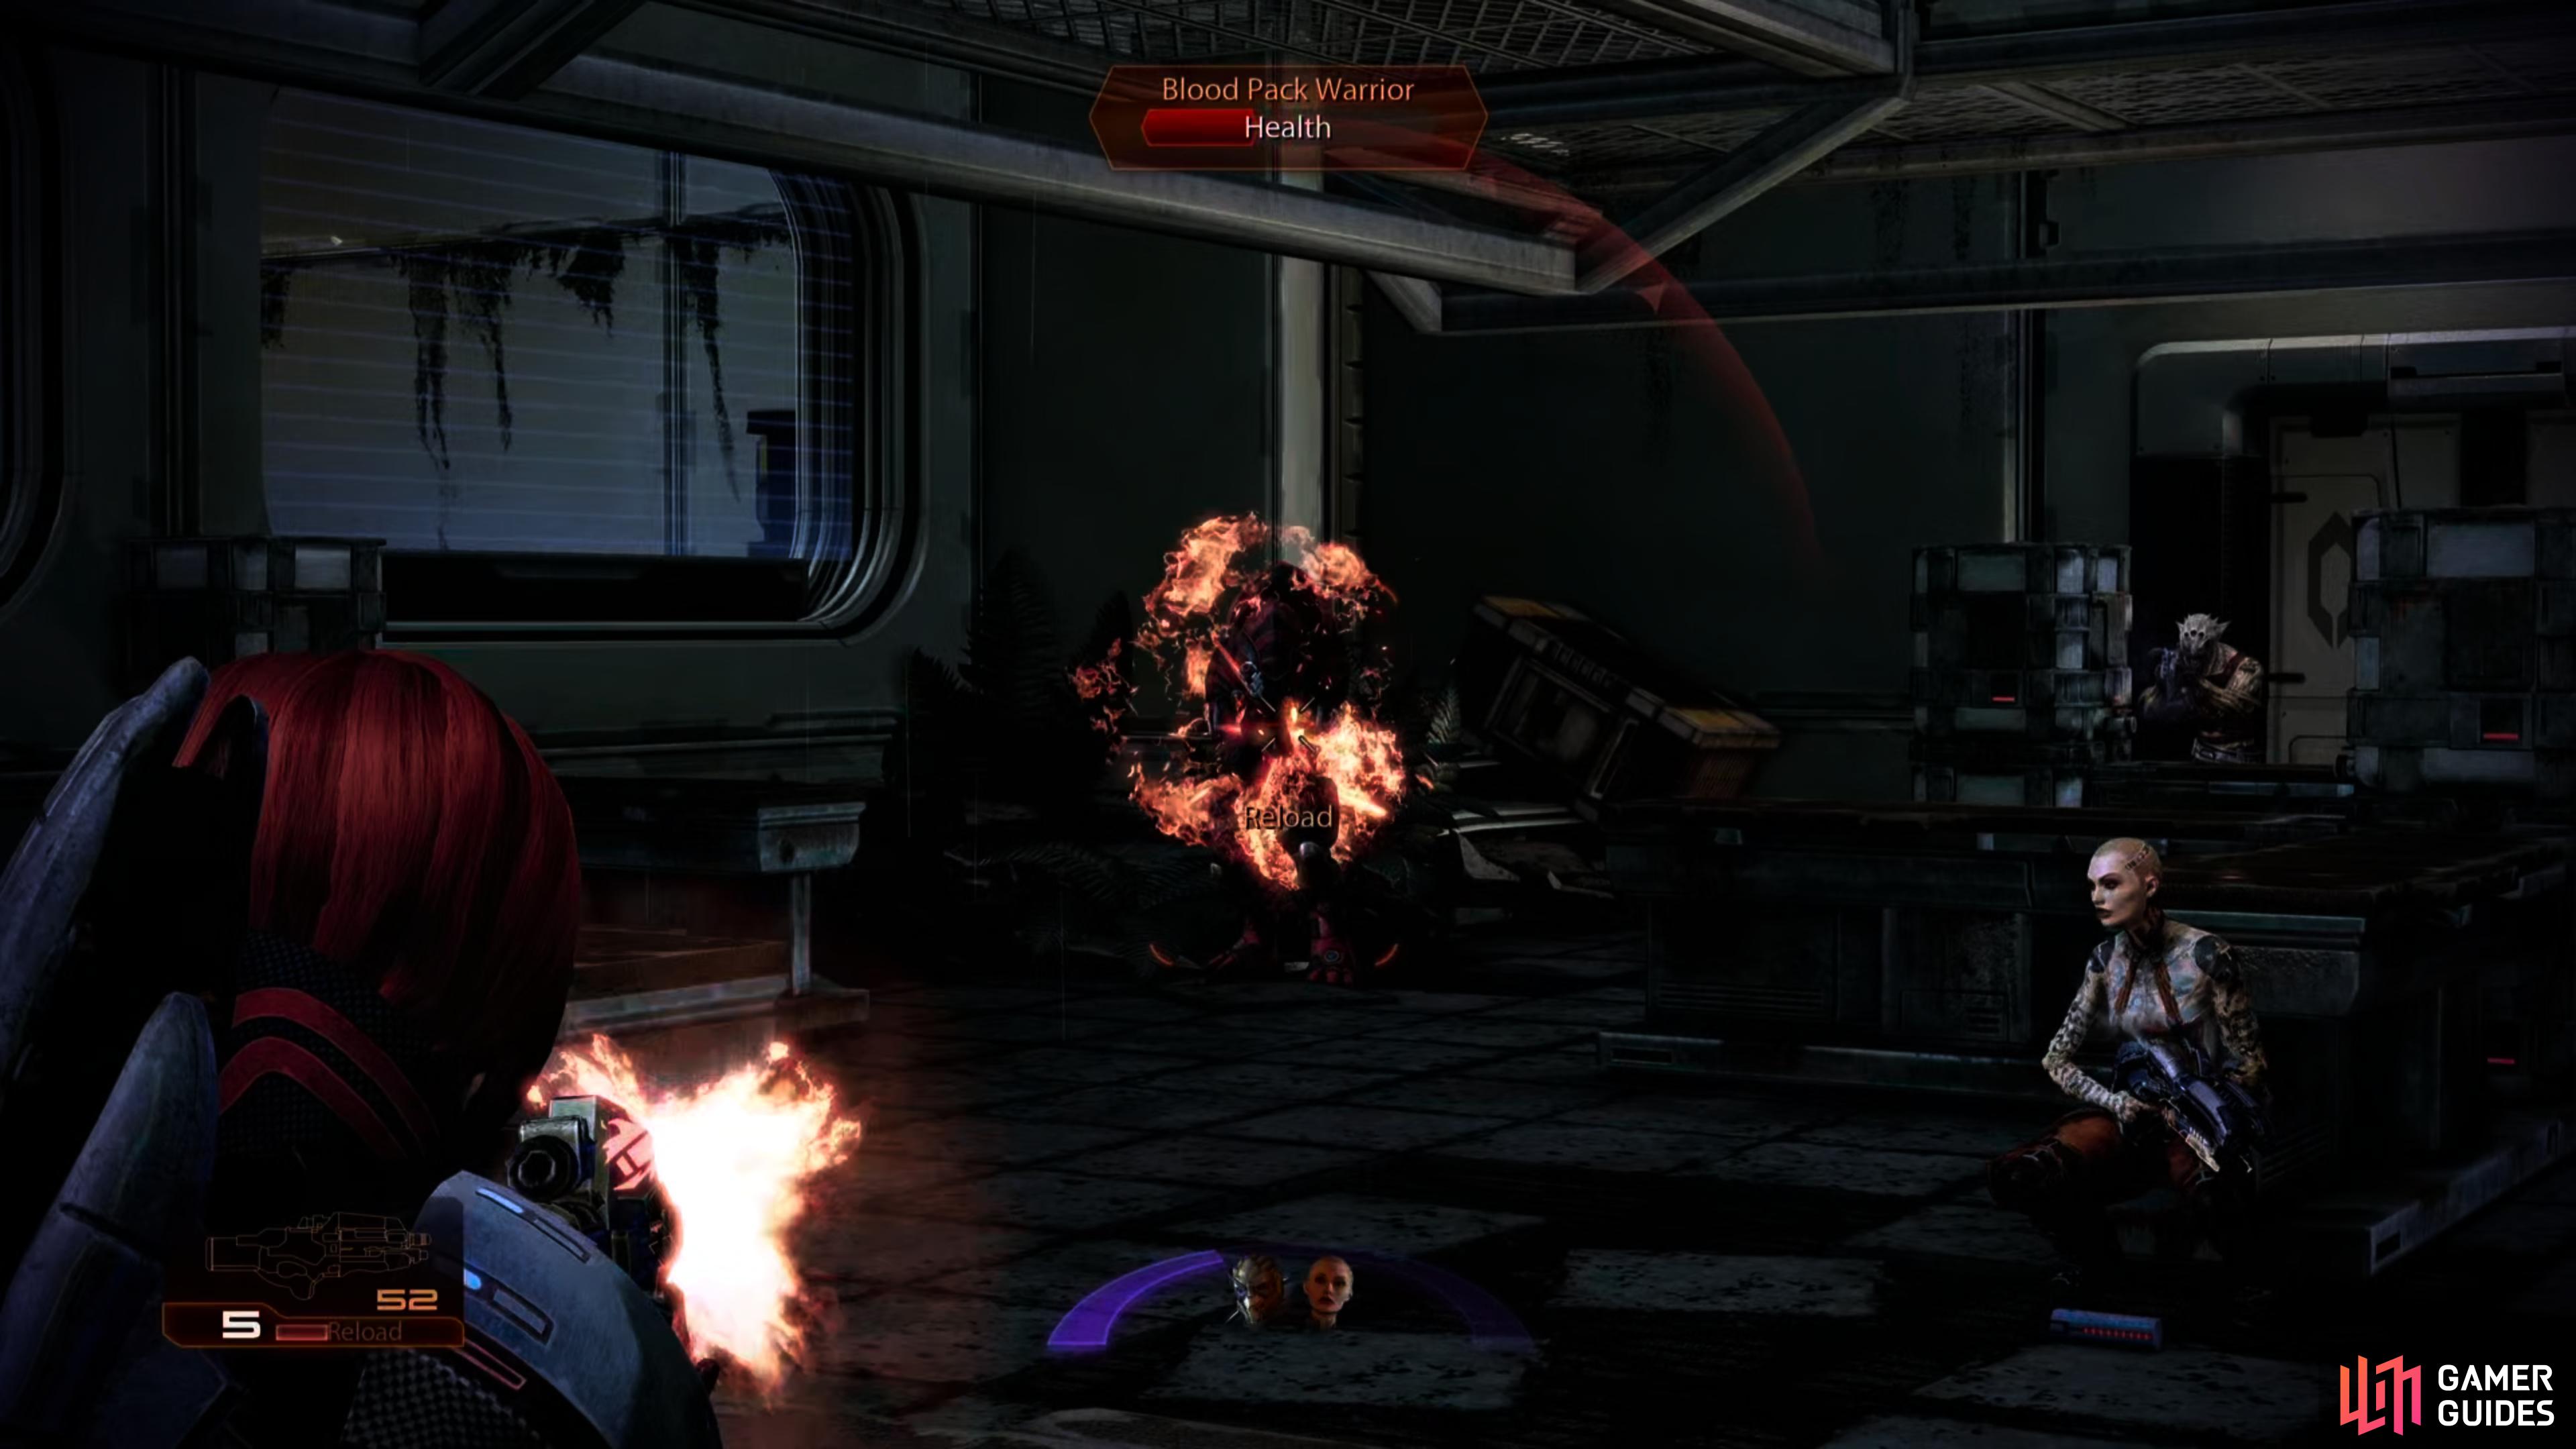 Eventually you'll run afoul of Blood Pack mercenaries, including the standard vorcha and krogan variants.